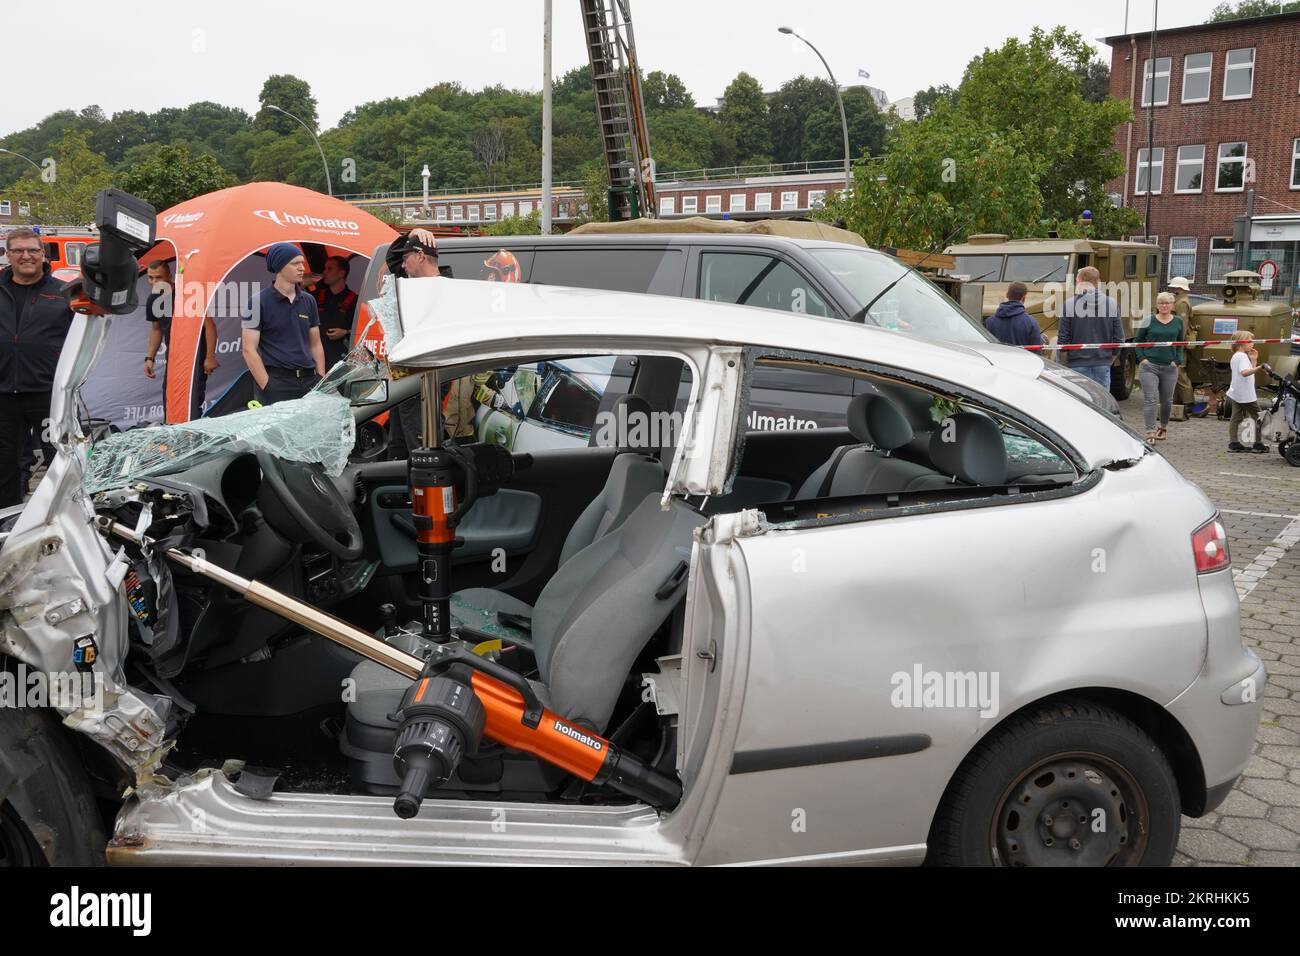 Open day demonstration of emergency rescuing people from damaged cars during traffic accidents. Stock Photo